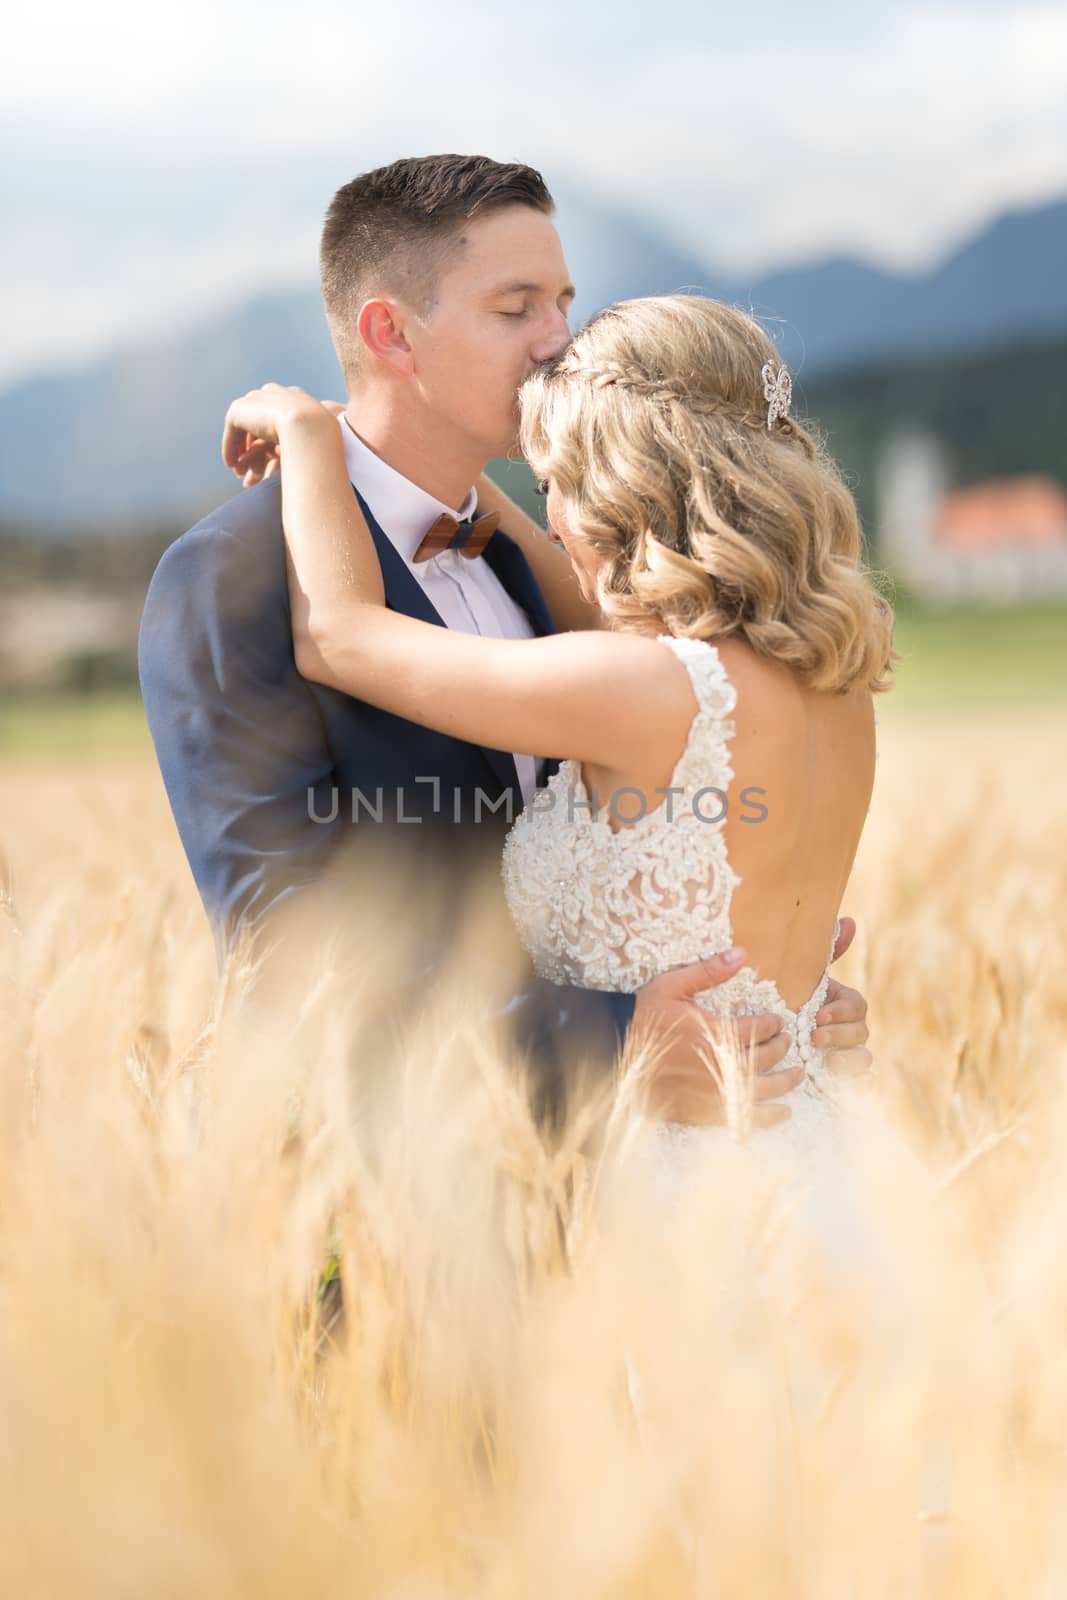 Groom hugging bride tenderly and kisses her on forehead in wheat field somewhere in Slovenian countryside. Caucasian happy romantic young couple celebrating their marriage.